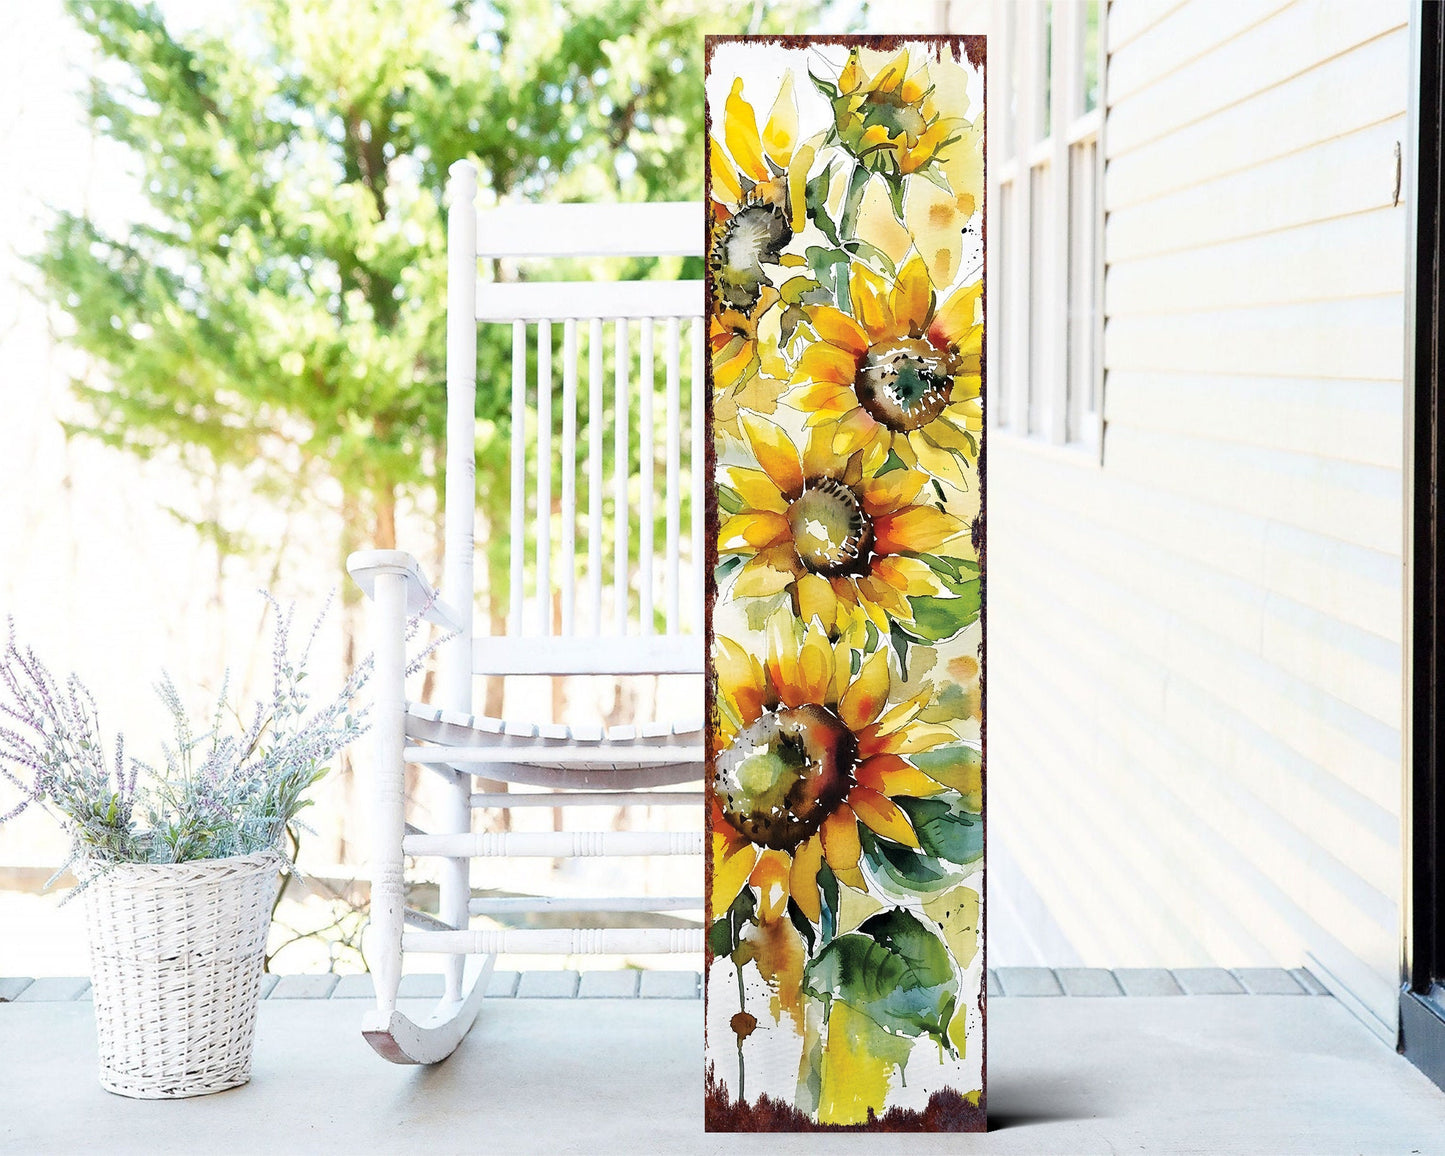 36-Inch Summer Watercolor Sunflower Wooden Porch Sign | Rustic Farmhouse Decor for Front Door, Wall, Outdoor Entryway Display